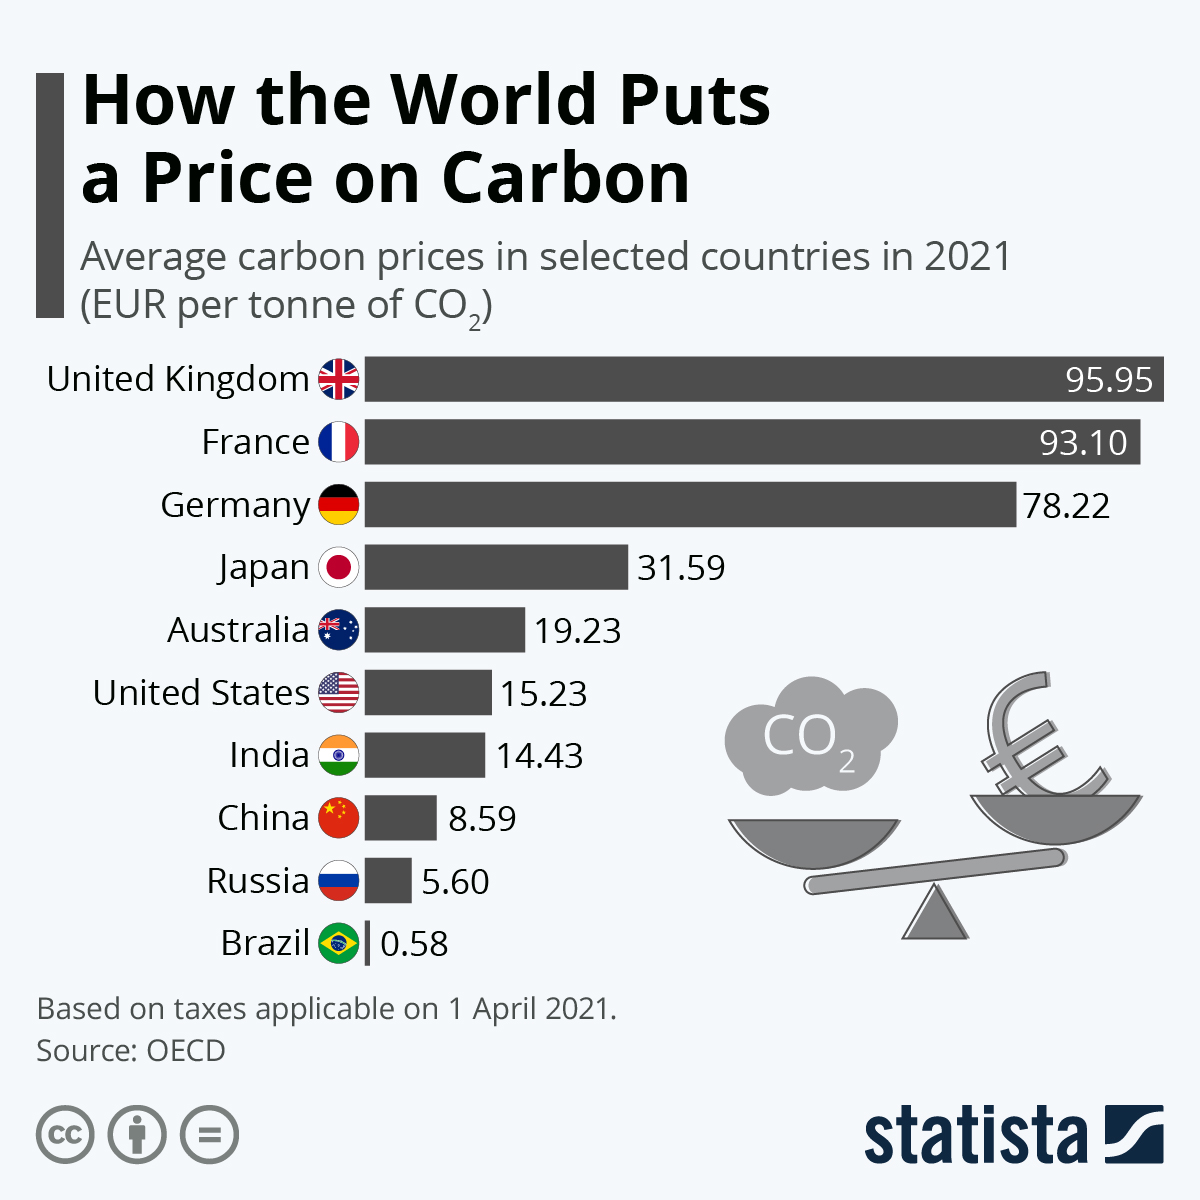 How the World Puts a Price on Carbon